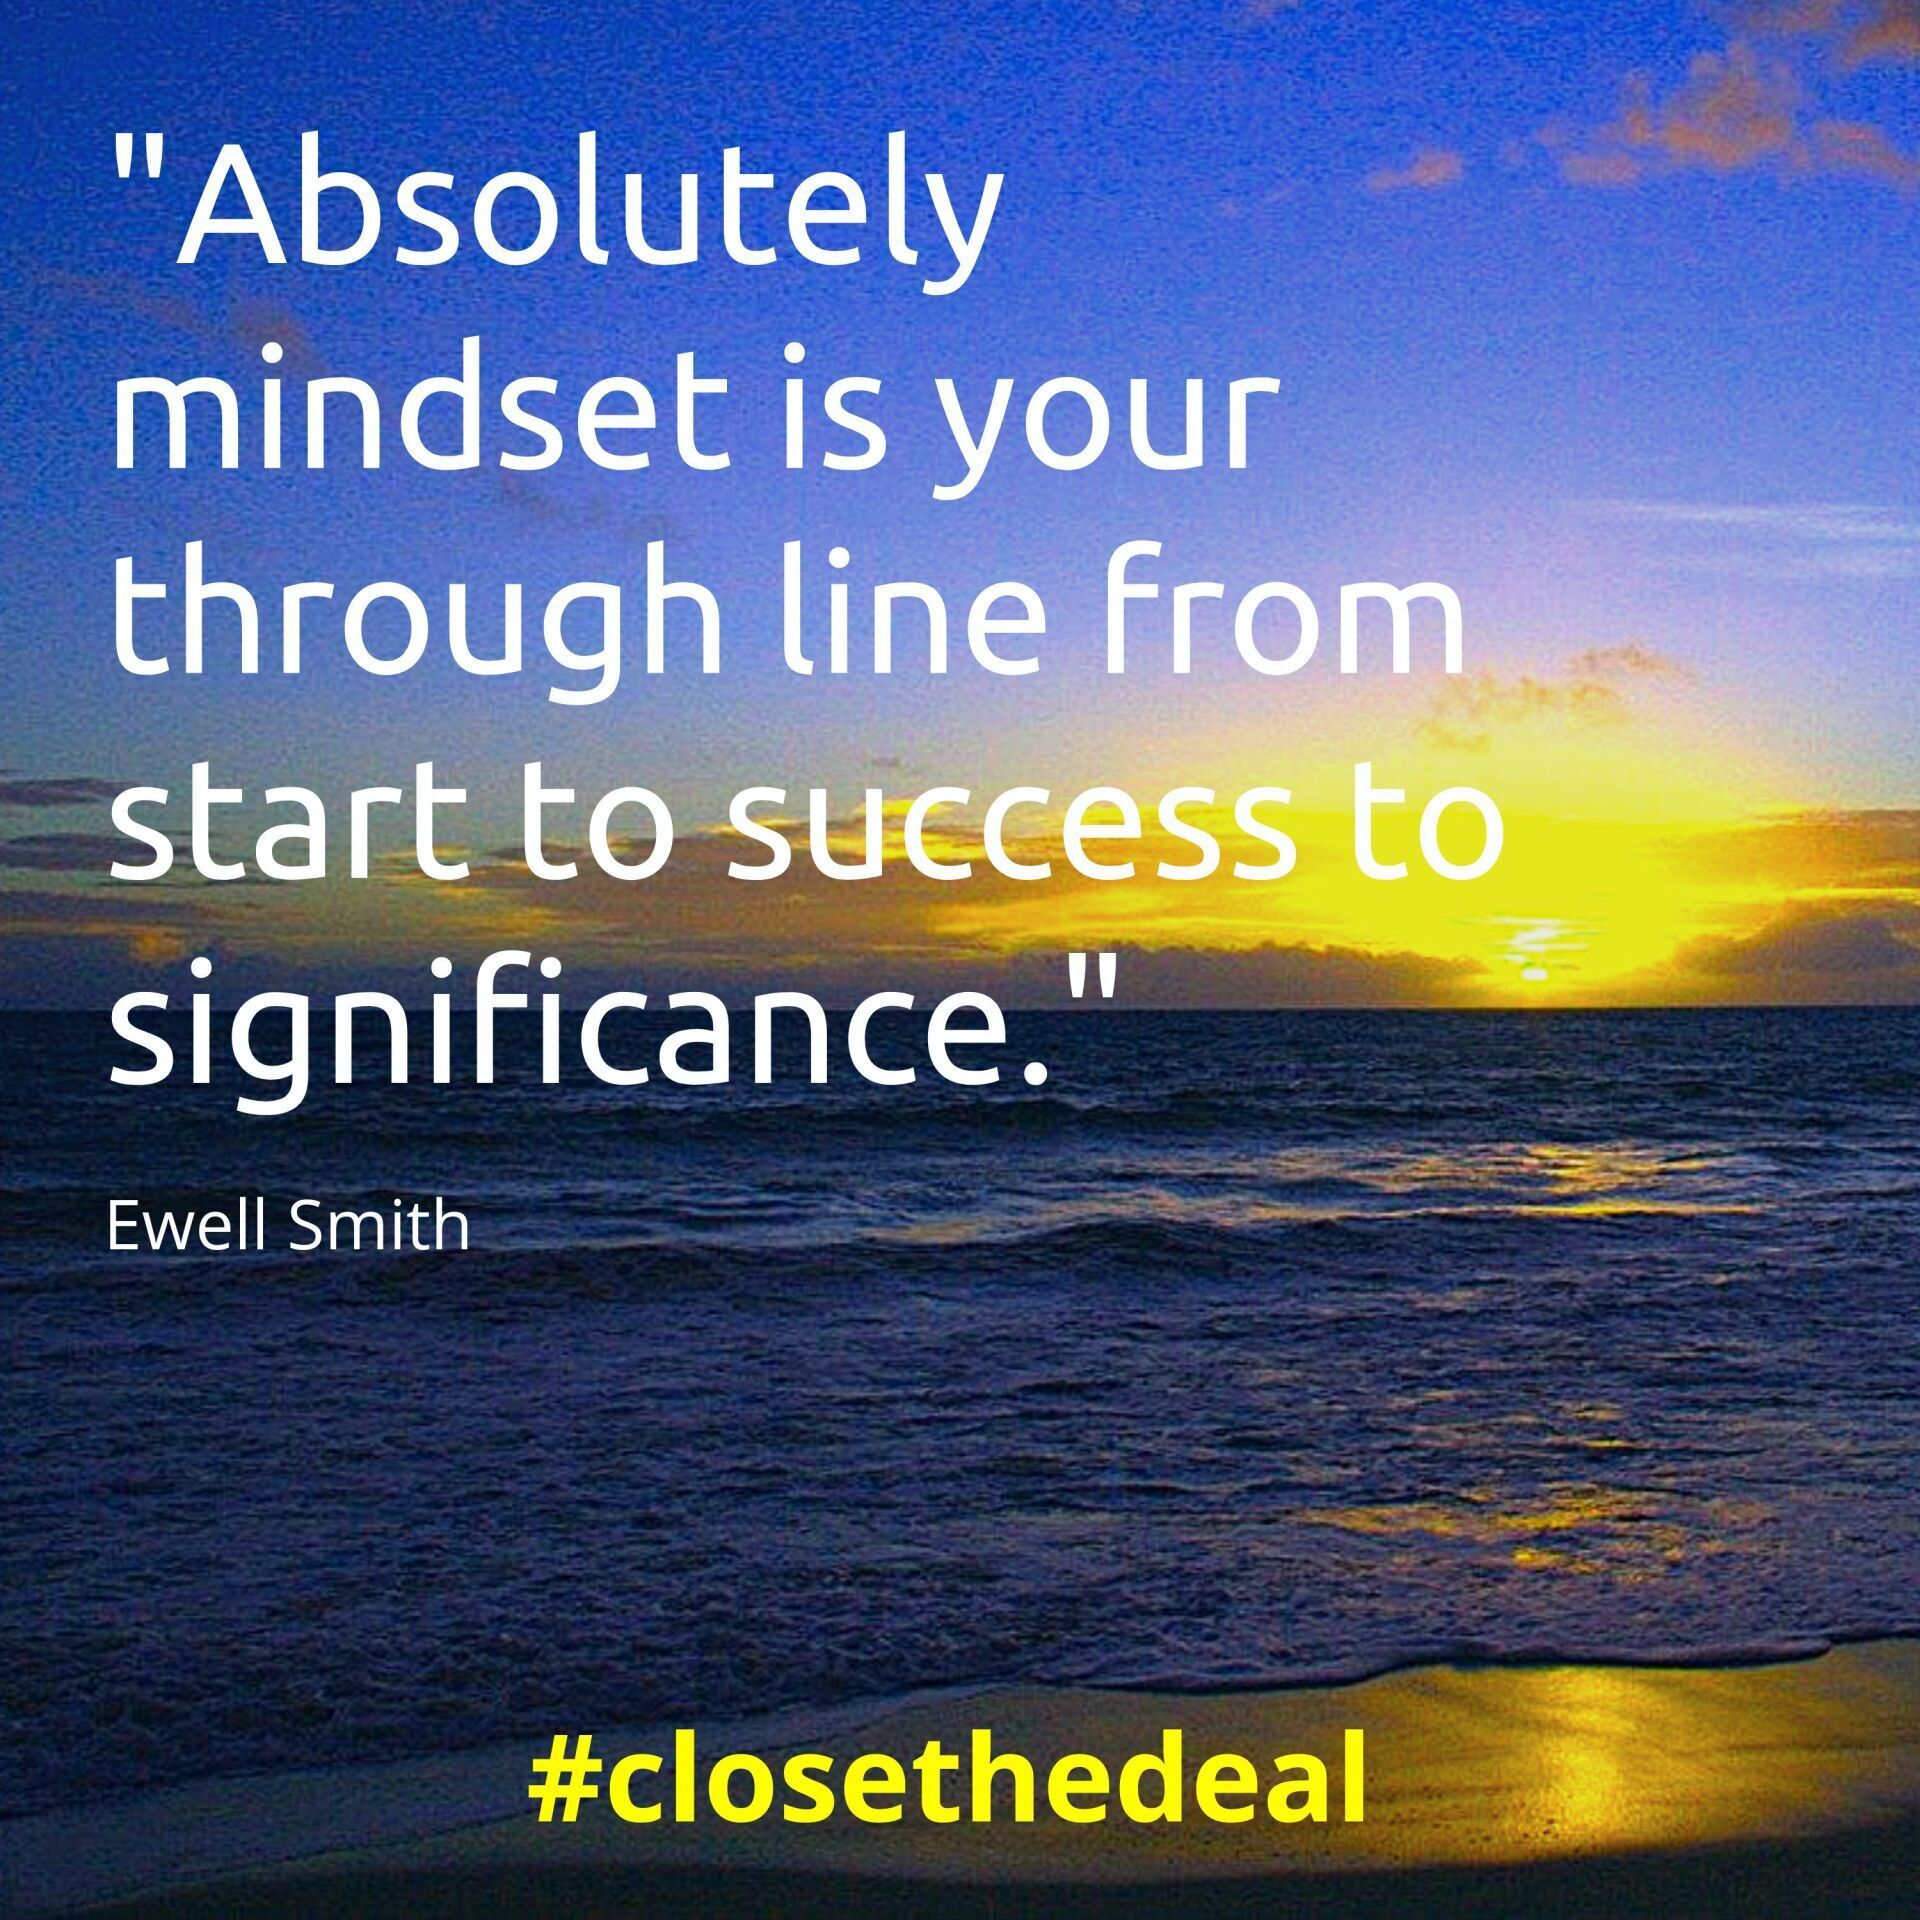 close the deal - absolutely mindset